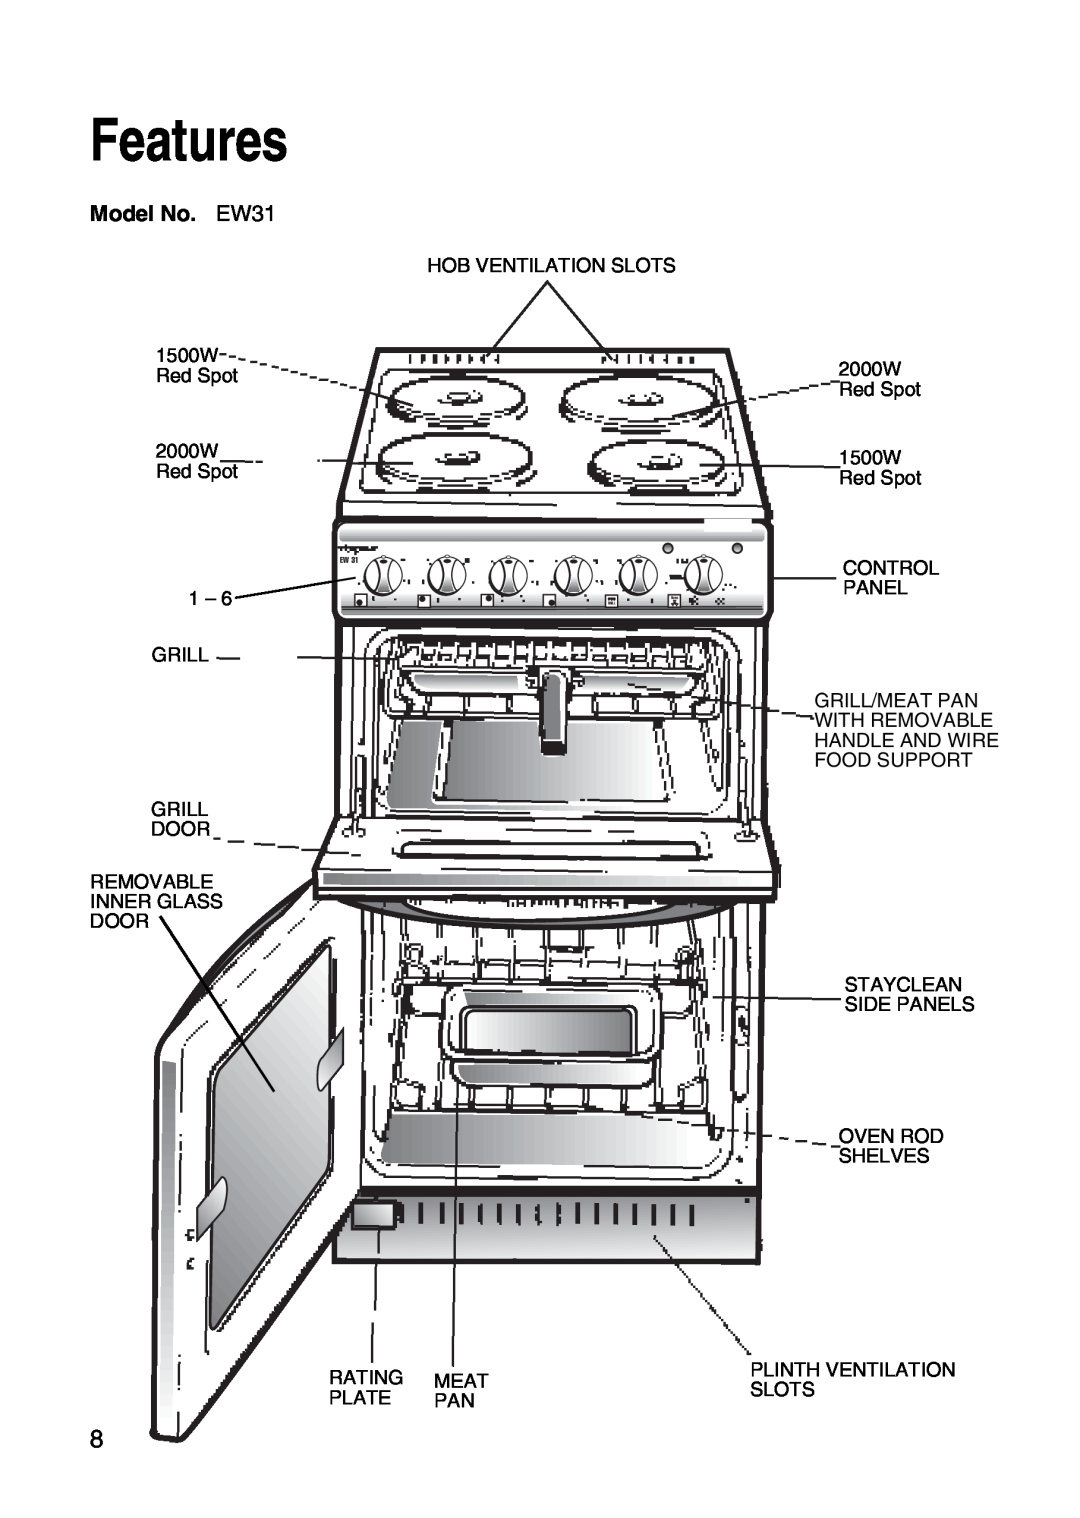 Hotpoint installation instructions Features, Model No. EW31 